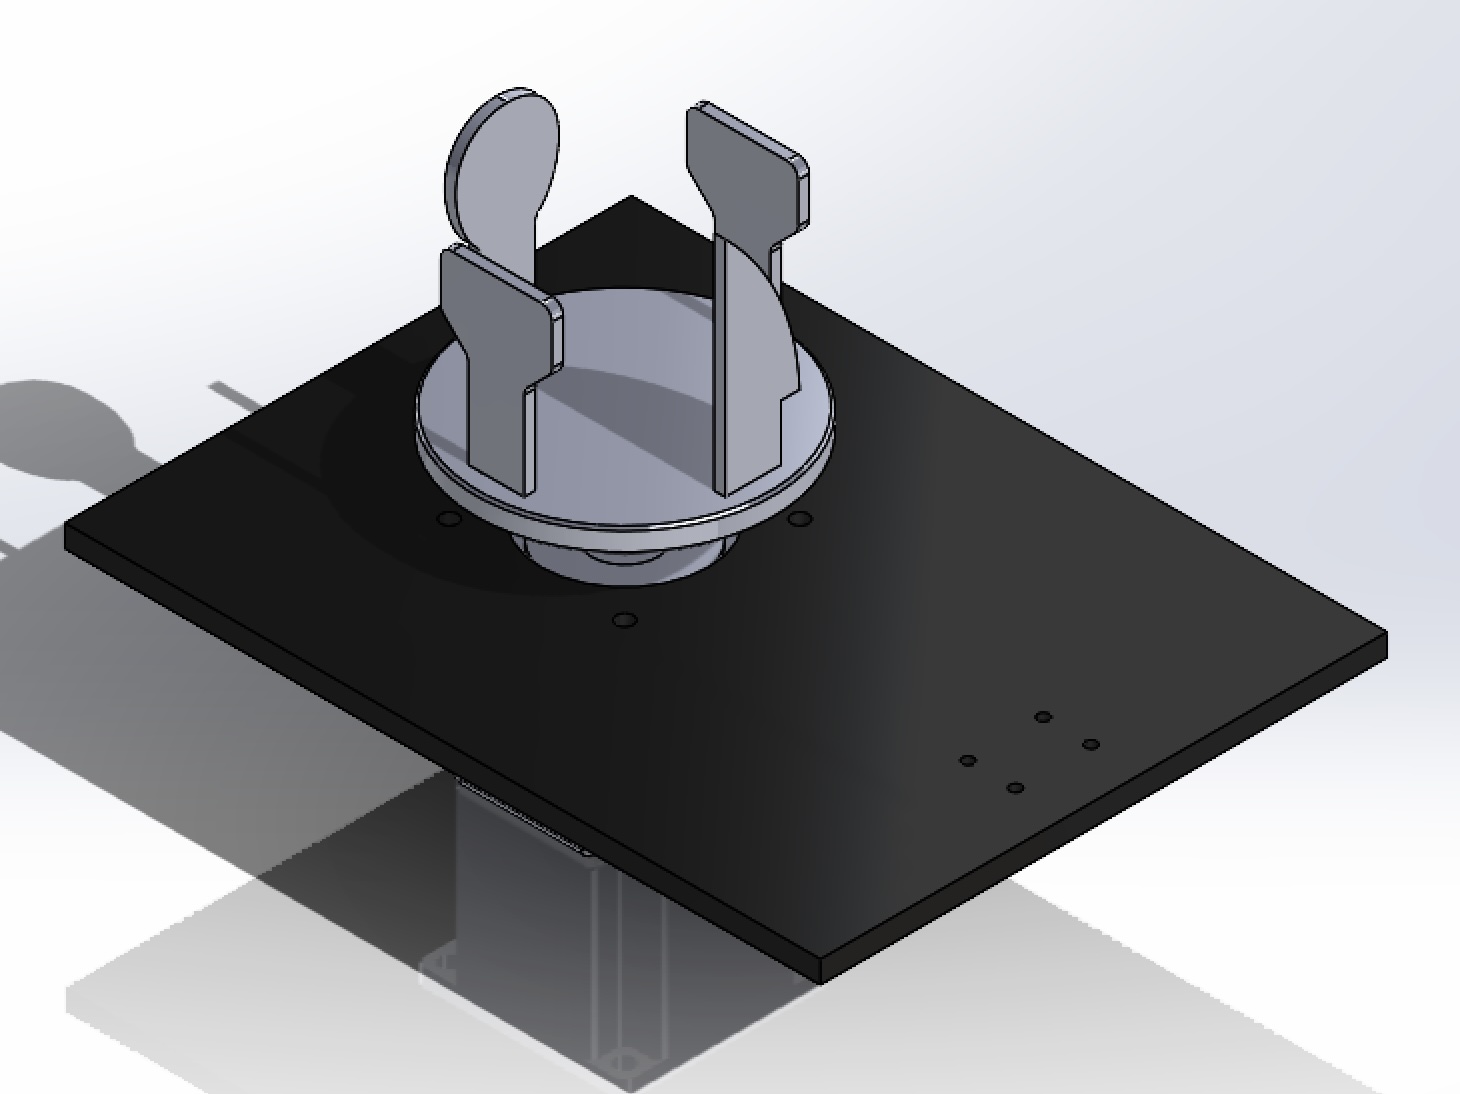 Isometric View of V1 CAD